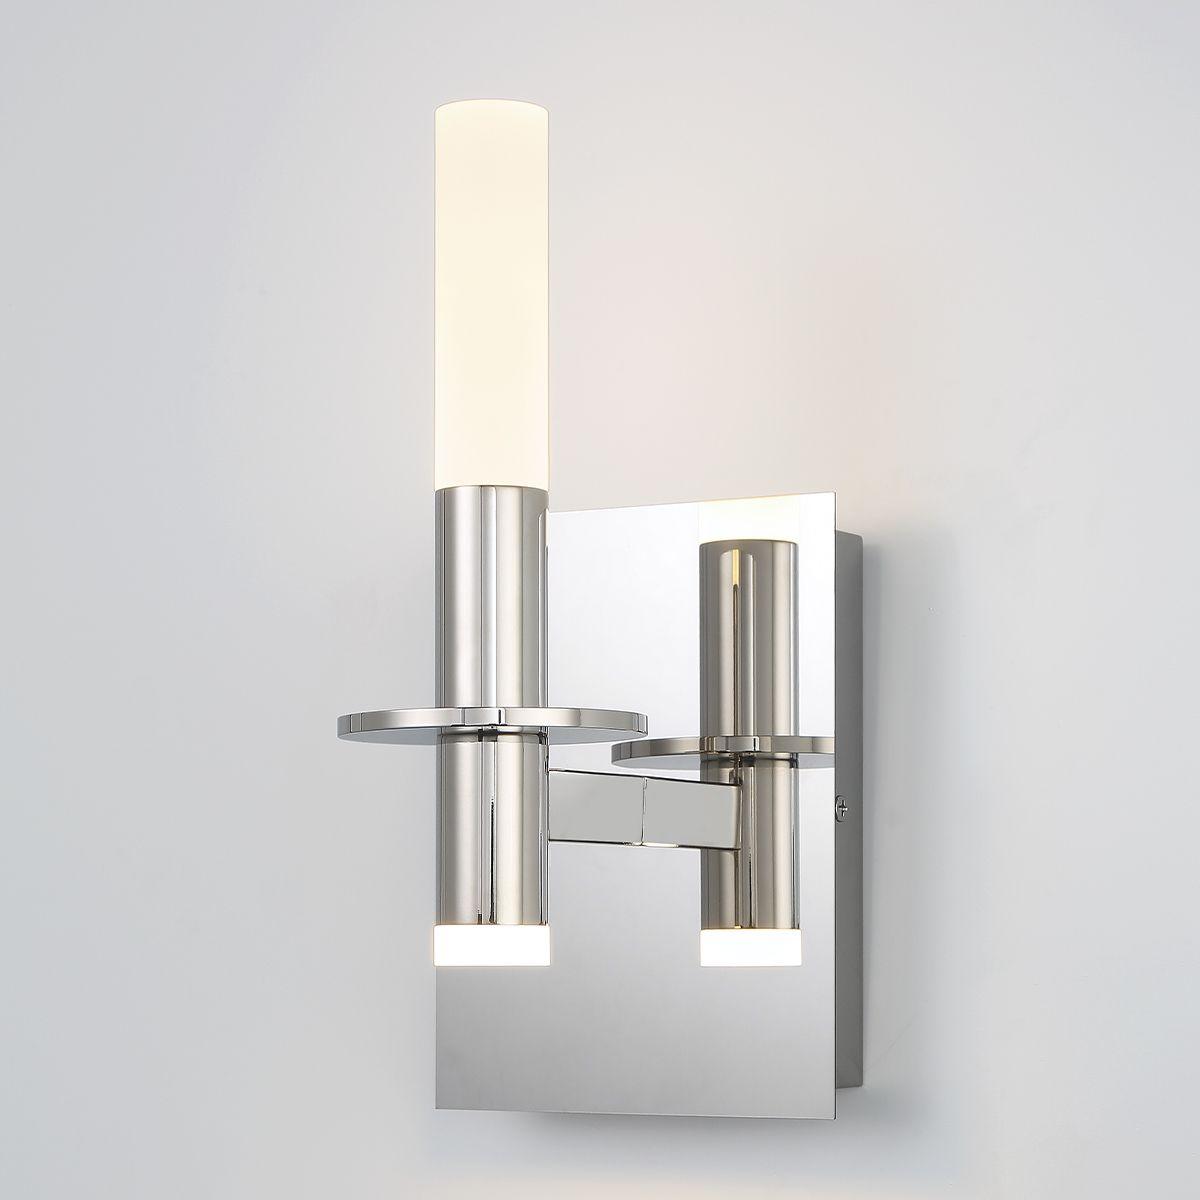 Torna 11 in. LED Bath Sconce